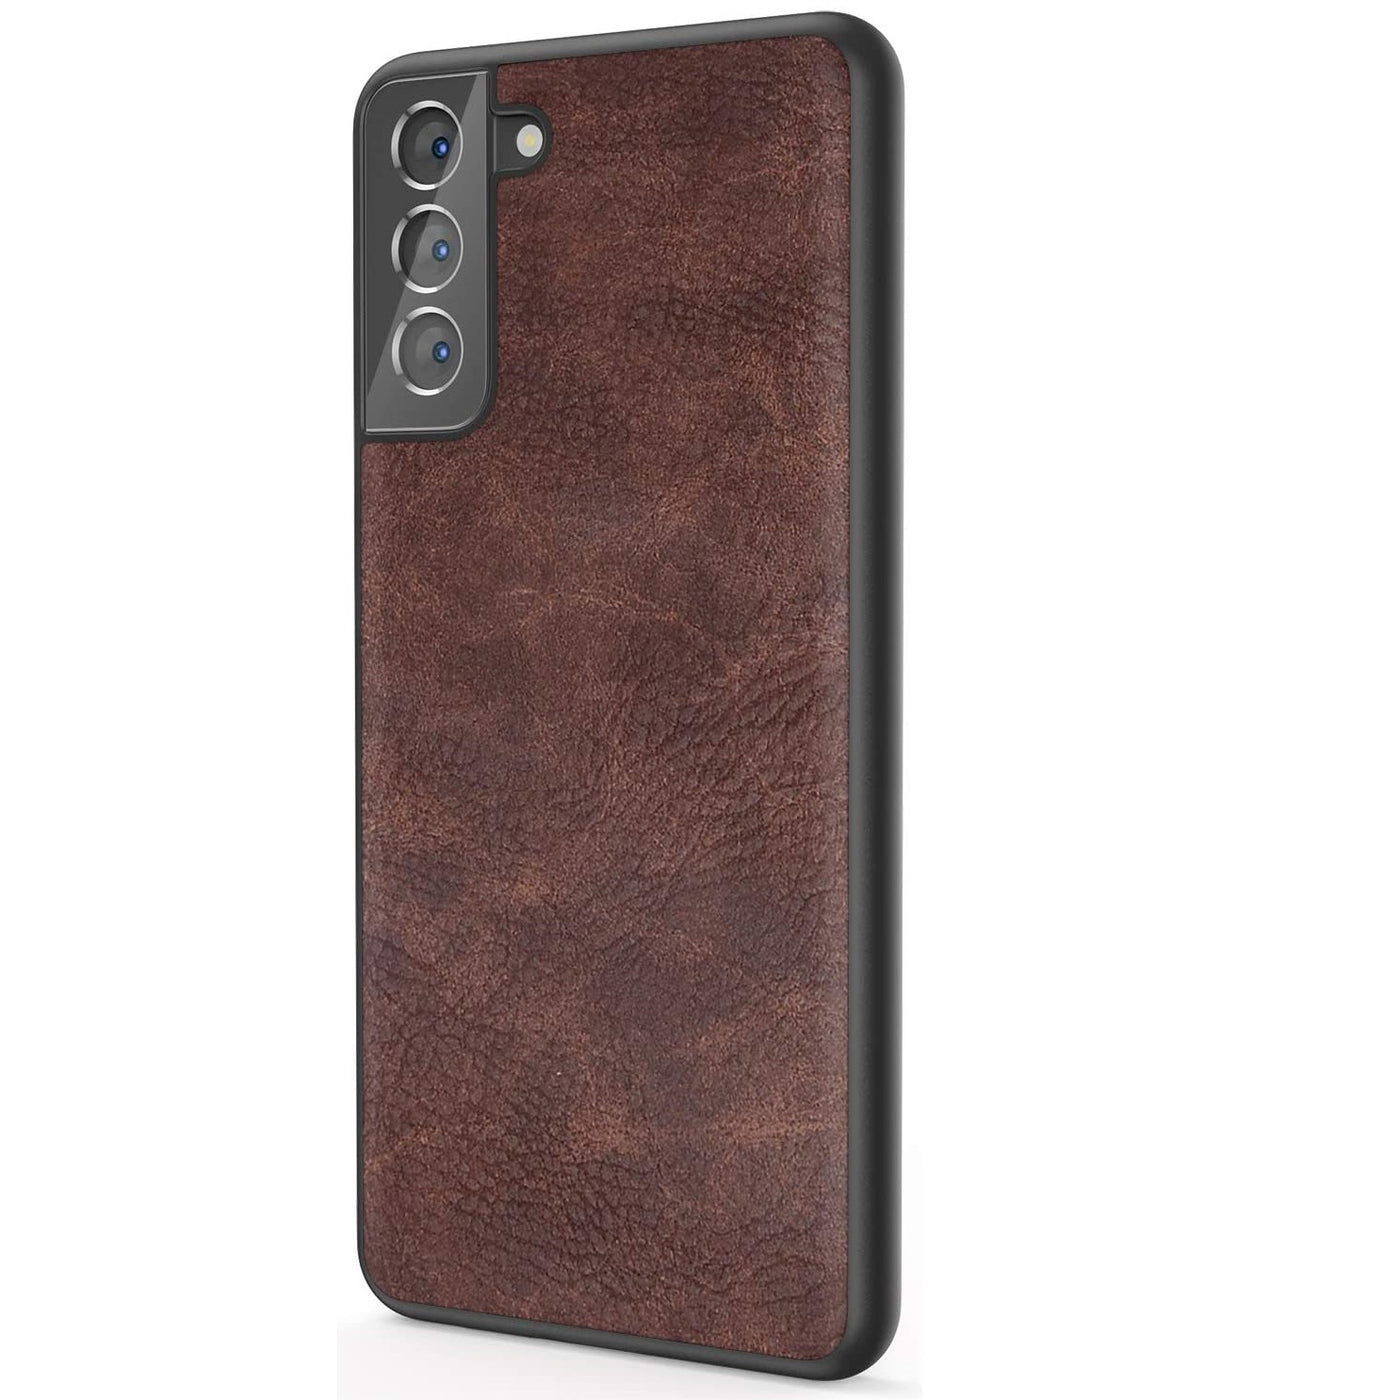 Excelsior Premium PU Leather Back Cover Case For Samsung Galaxy S21 Plus